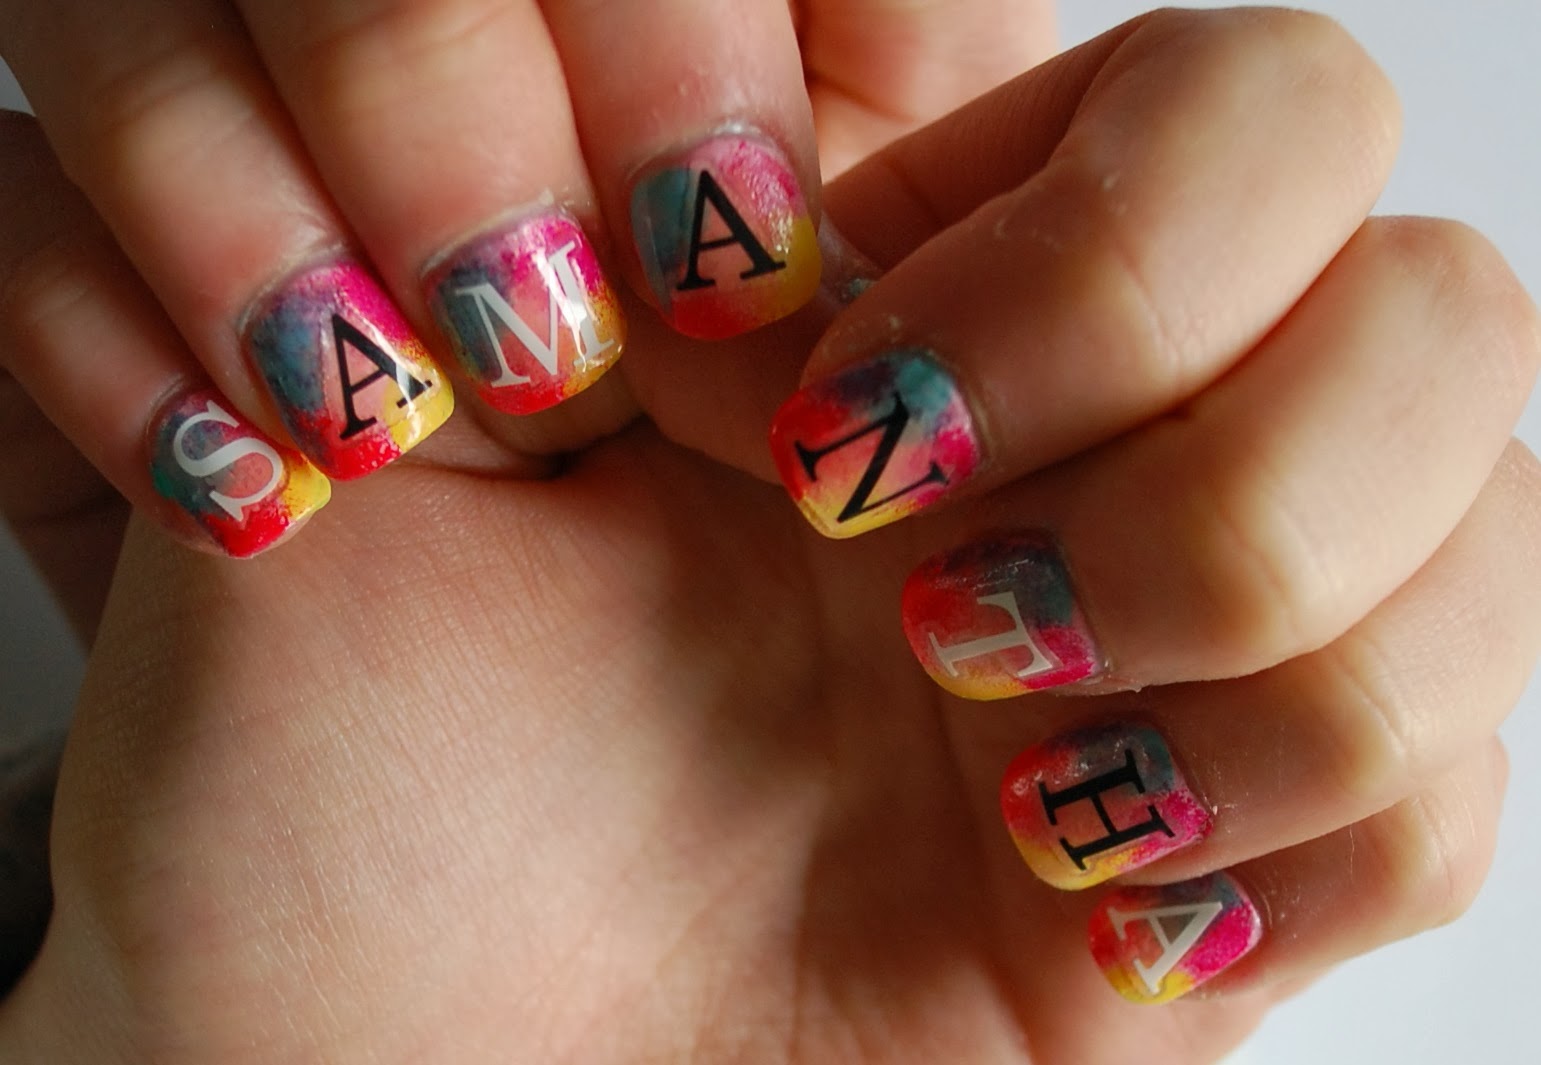 In SAMazement Colourful Name Nails